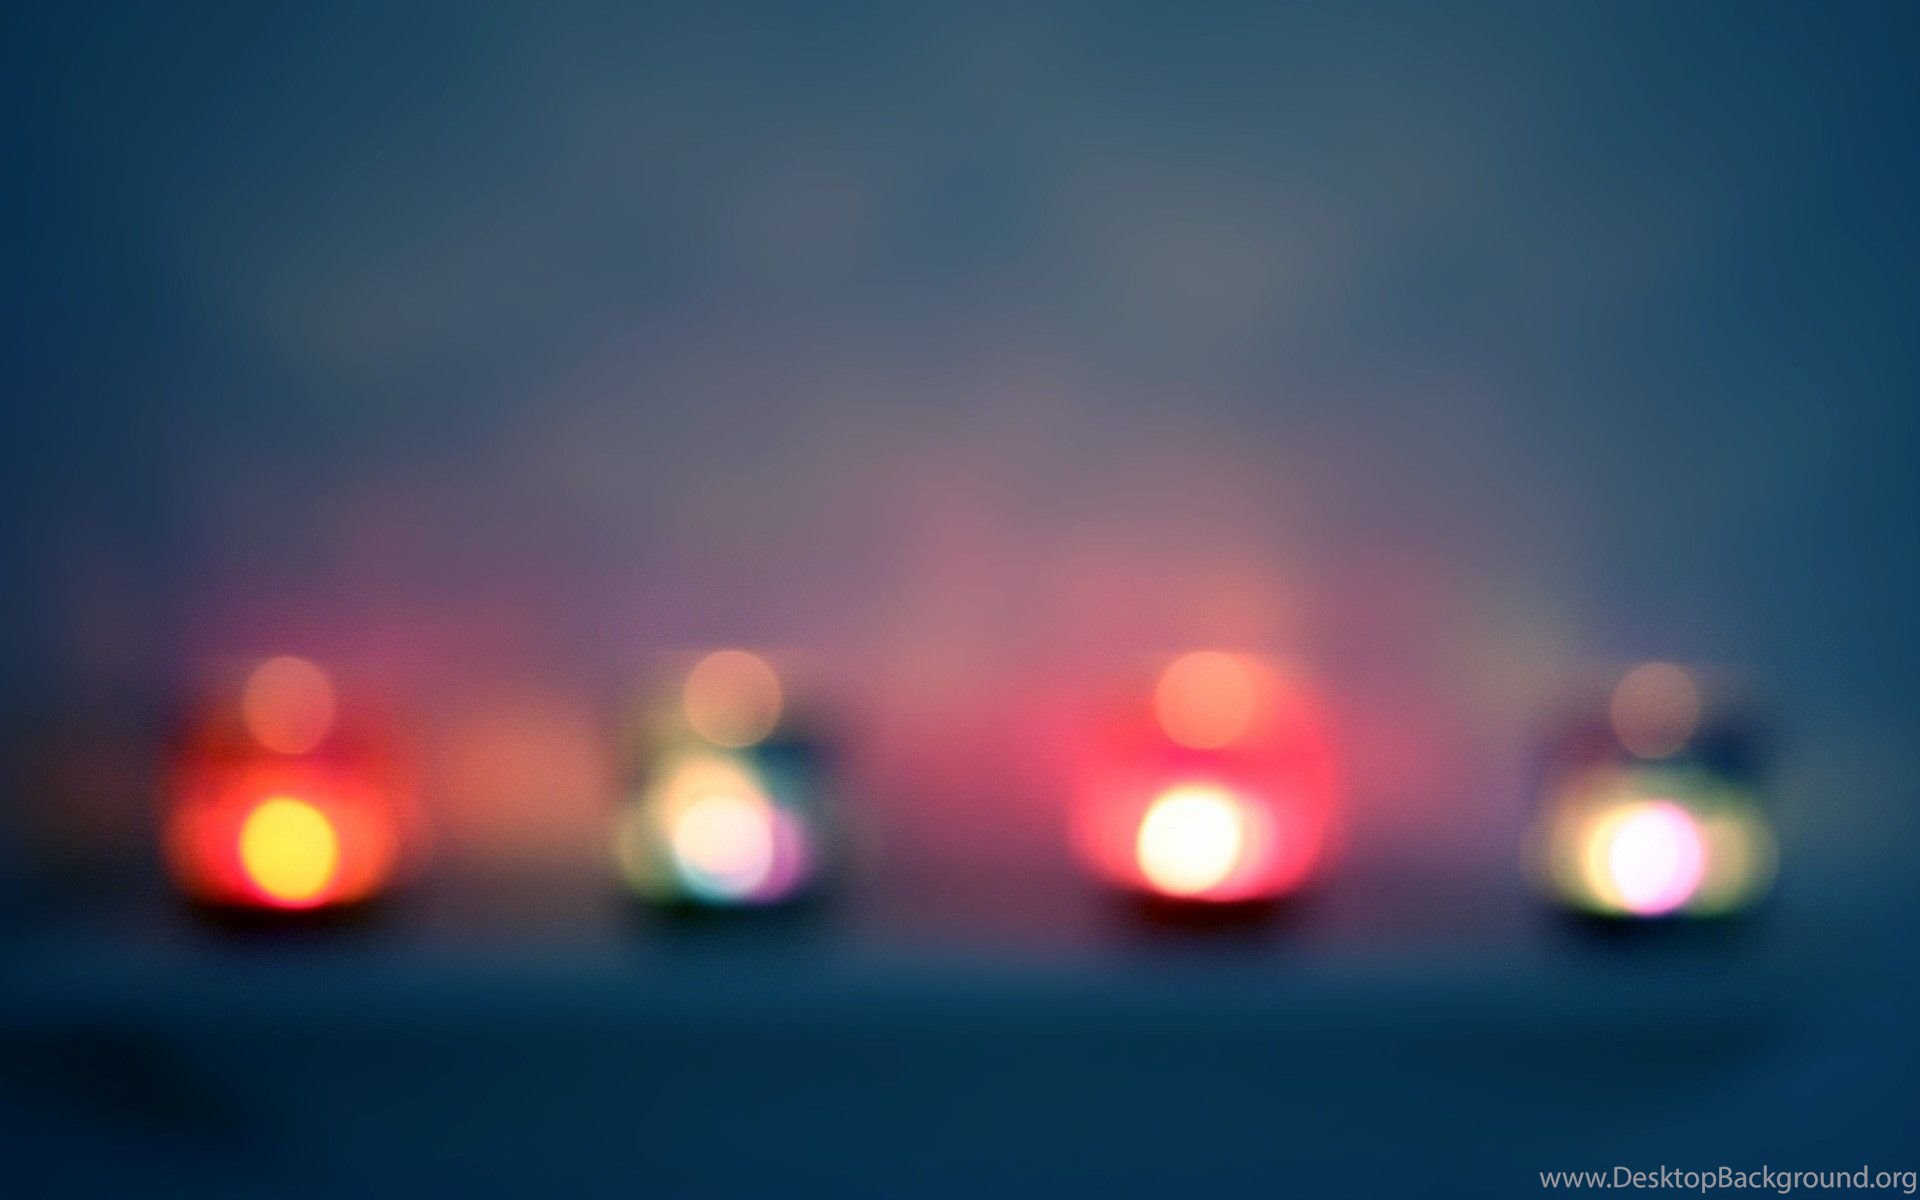 19x10 Blurred Candles Desktop Pc And Mac Wallpapers Desktop Background